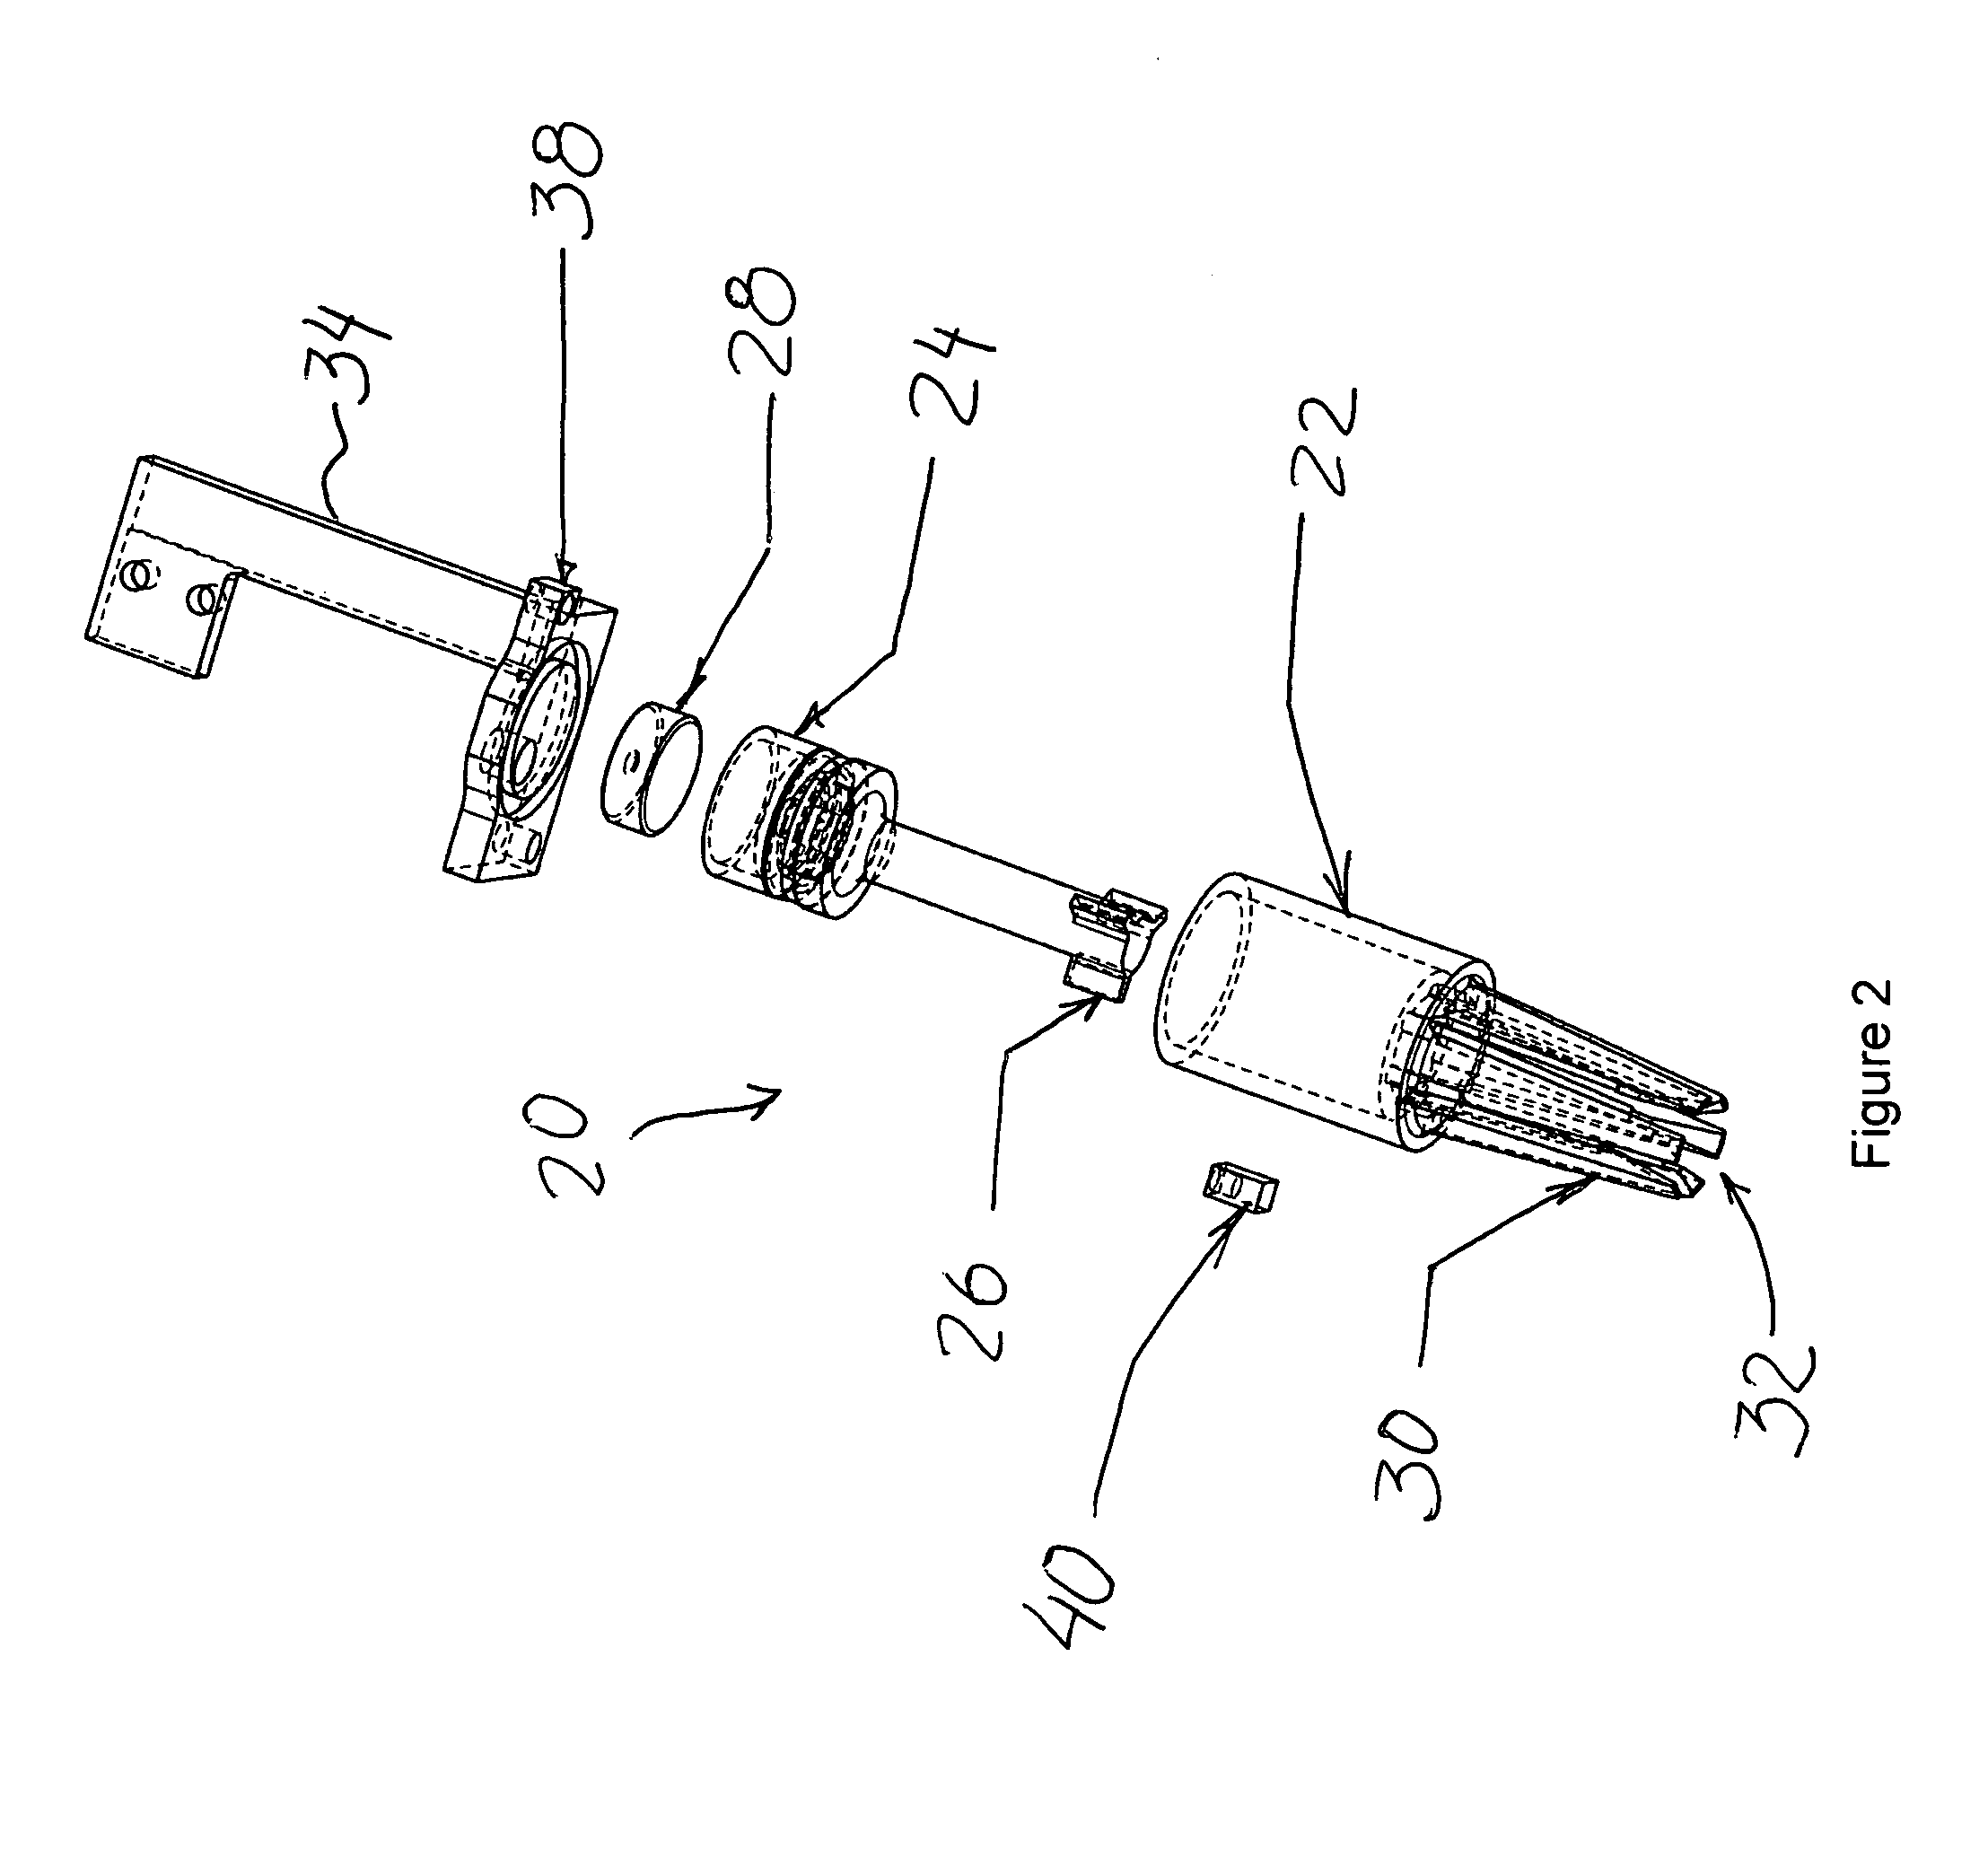 Method and system for picking and placing vessels